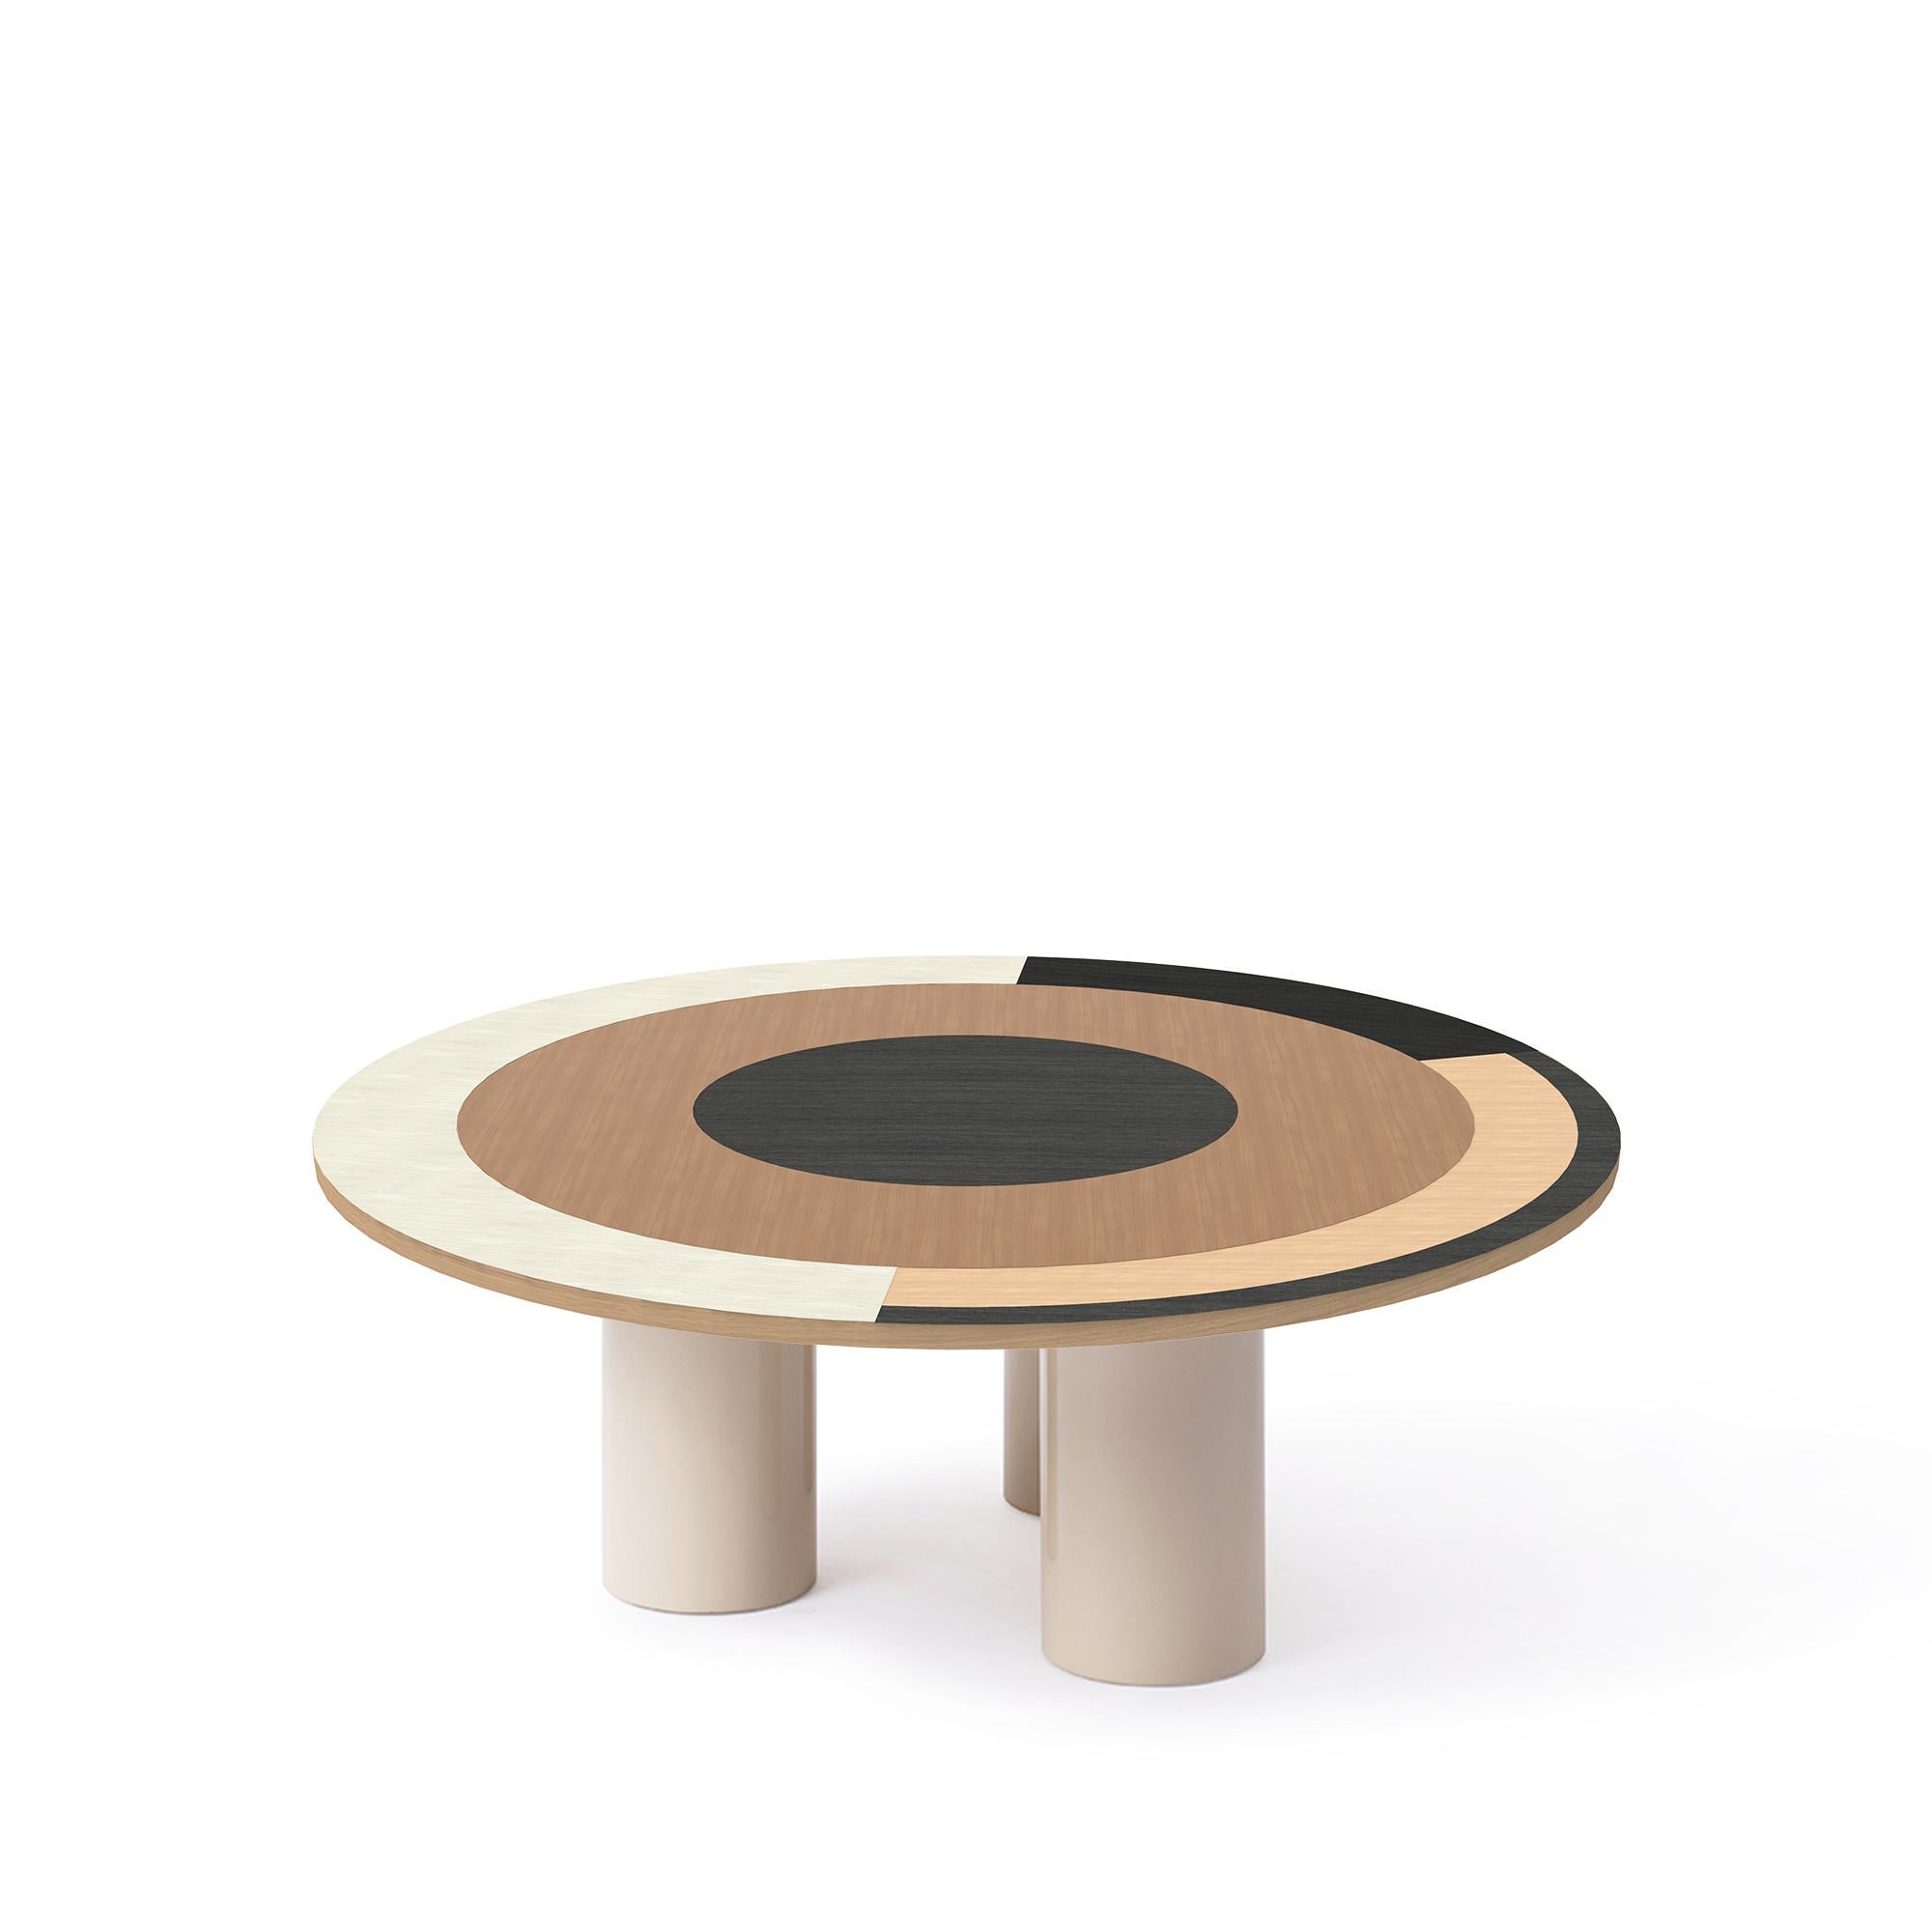 Sonia et caetera coffee table M2 designed by Thomas Dariel
Dimensions: 
Small: diameter 100 x height 37 cm 
Large: diameter 115 x height 37 cm 
Materials: Top in painted ash veneer, fronts in the matte paint finish, Structure in MDF, Metal legs